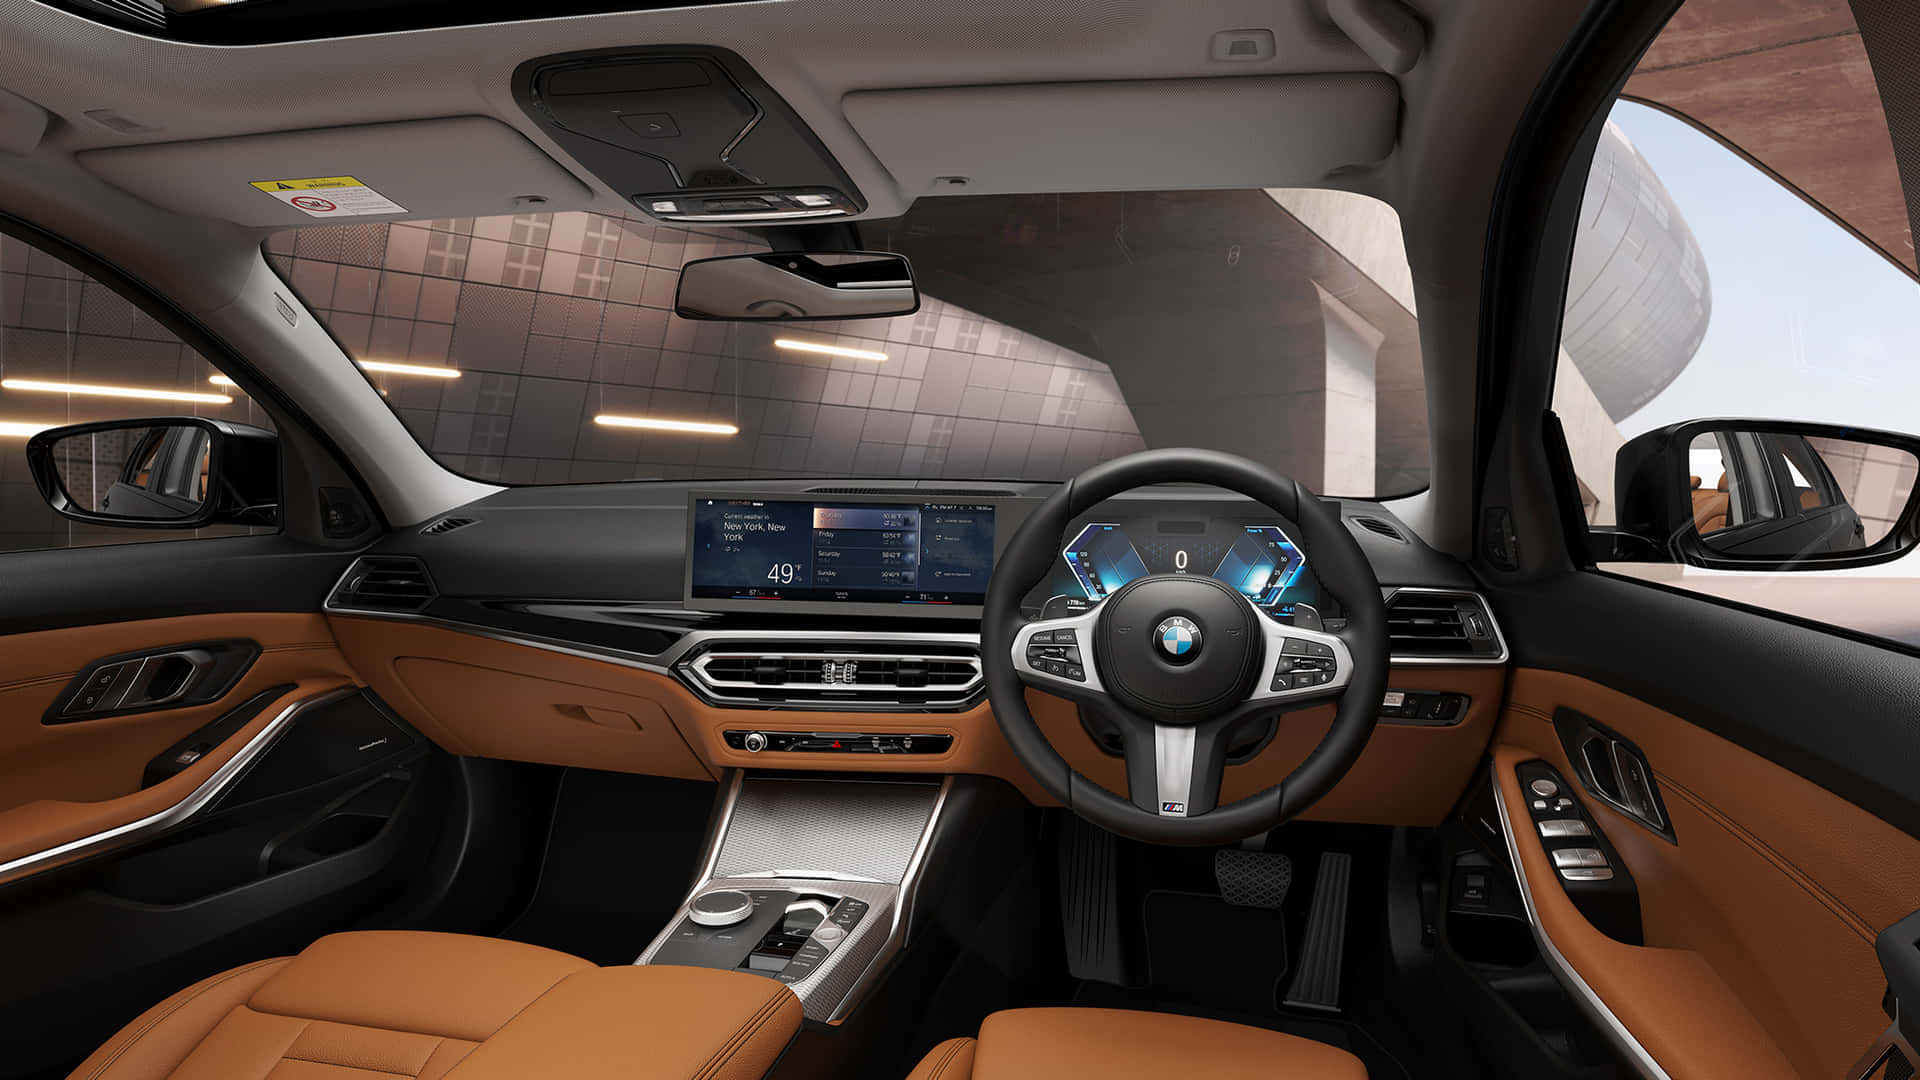 Enhance your experience with BMW's iconic designs